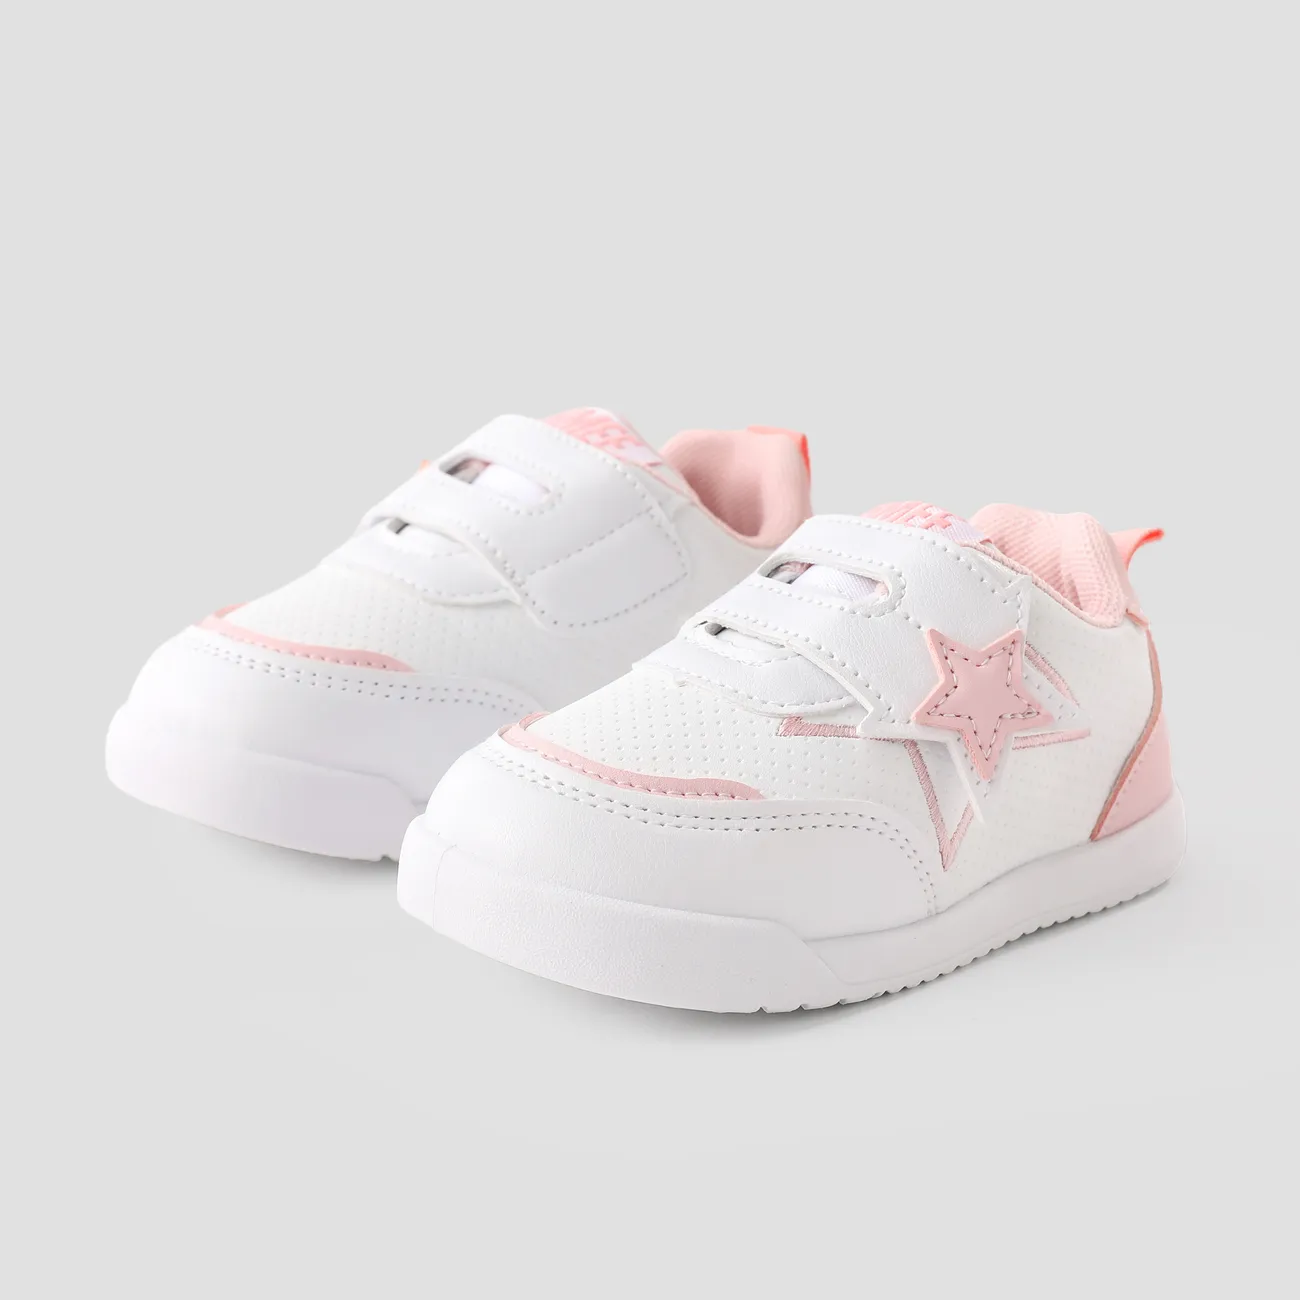 Toddlers and Kids Letters Embroidery Star Pattern Velcro Design Casual Shoes Pink big image 1